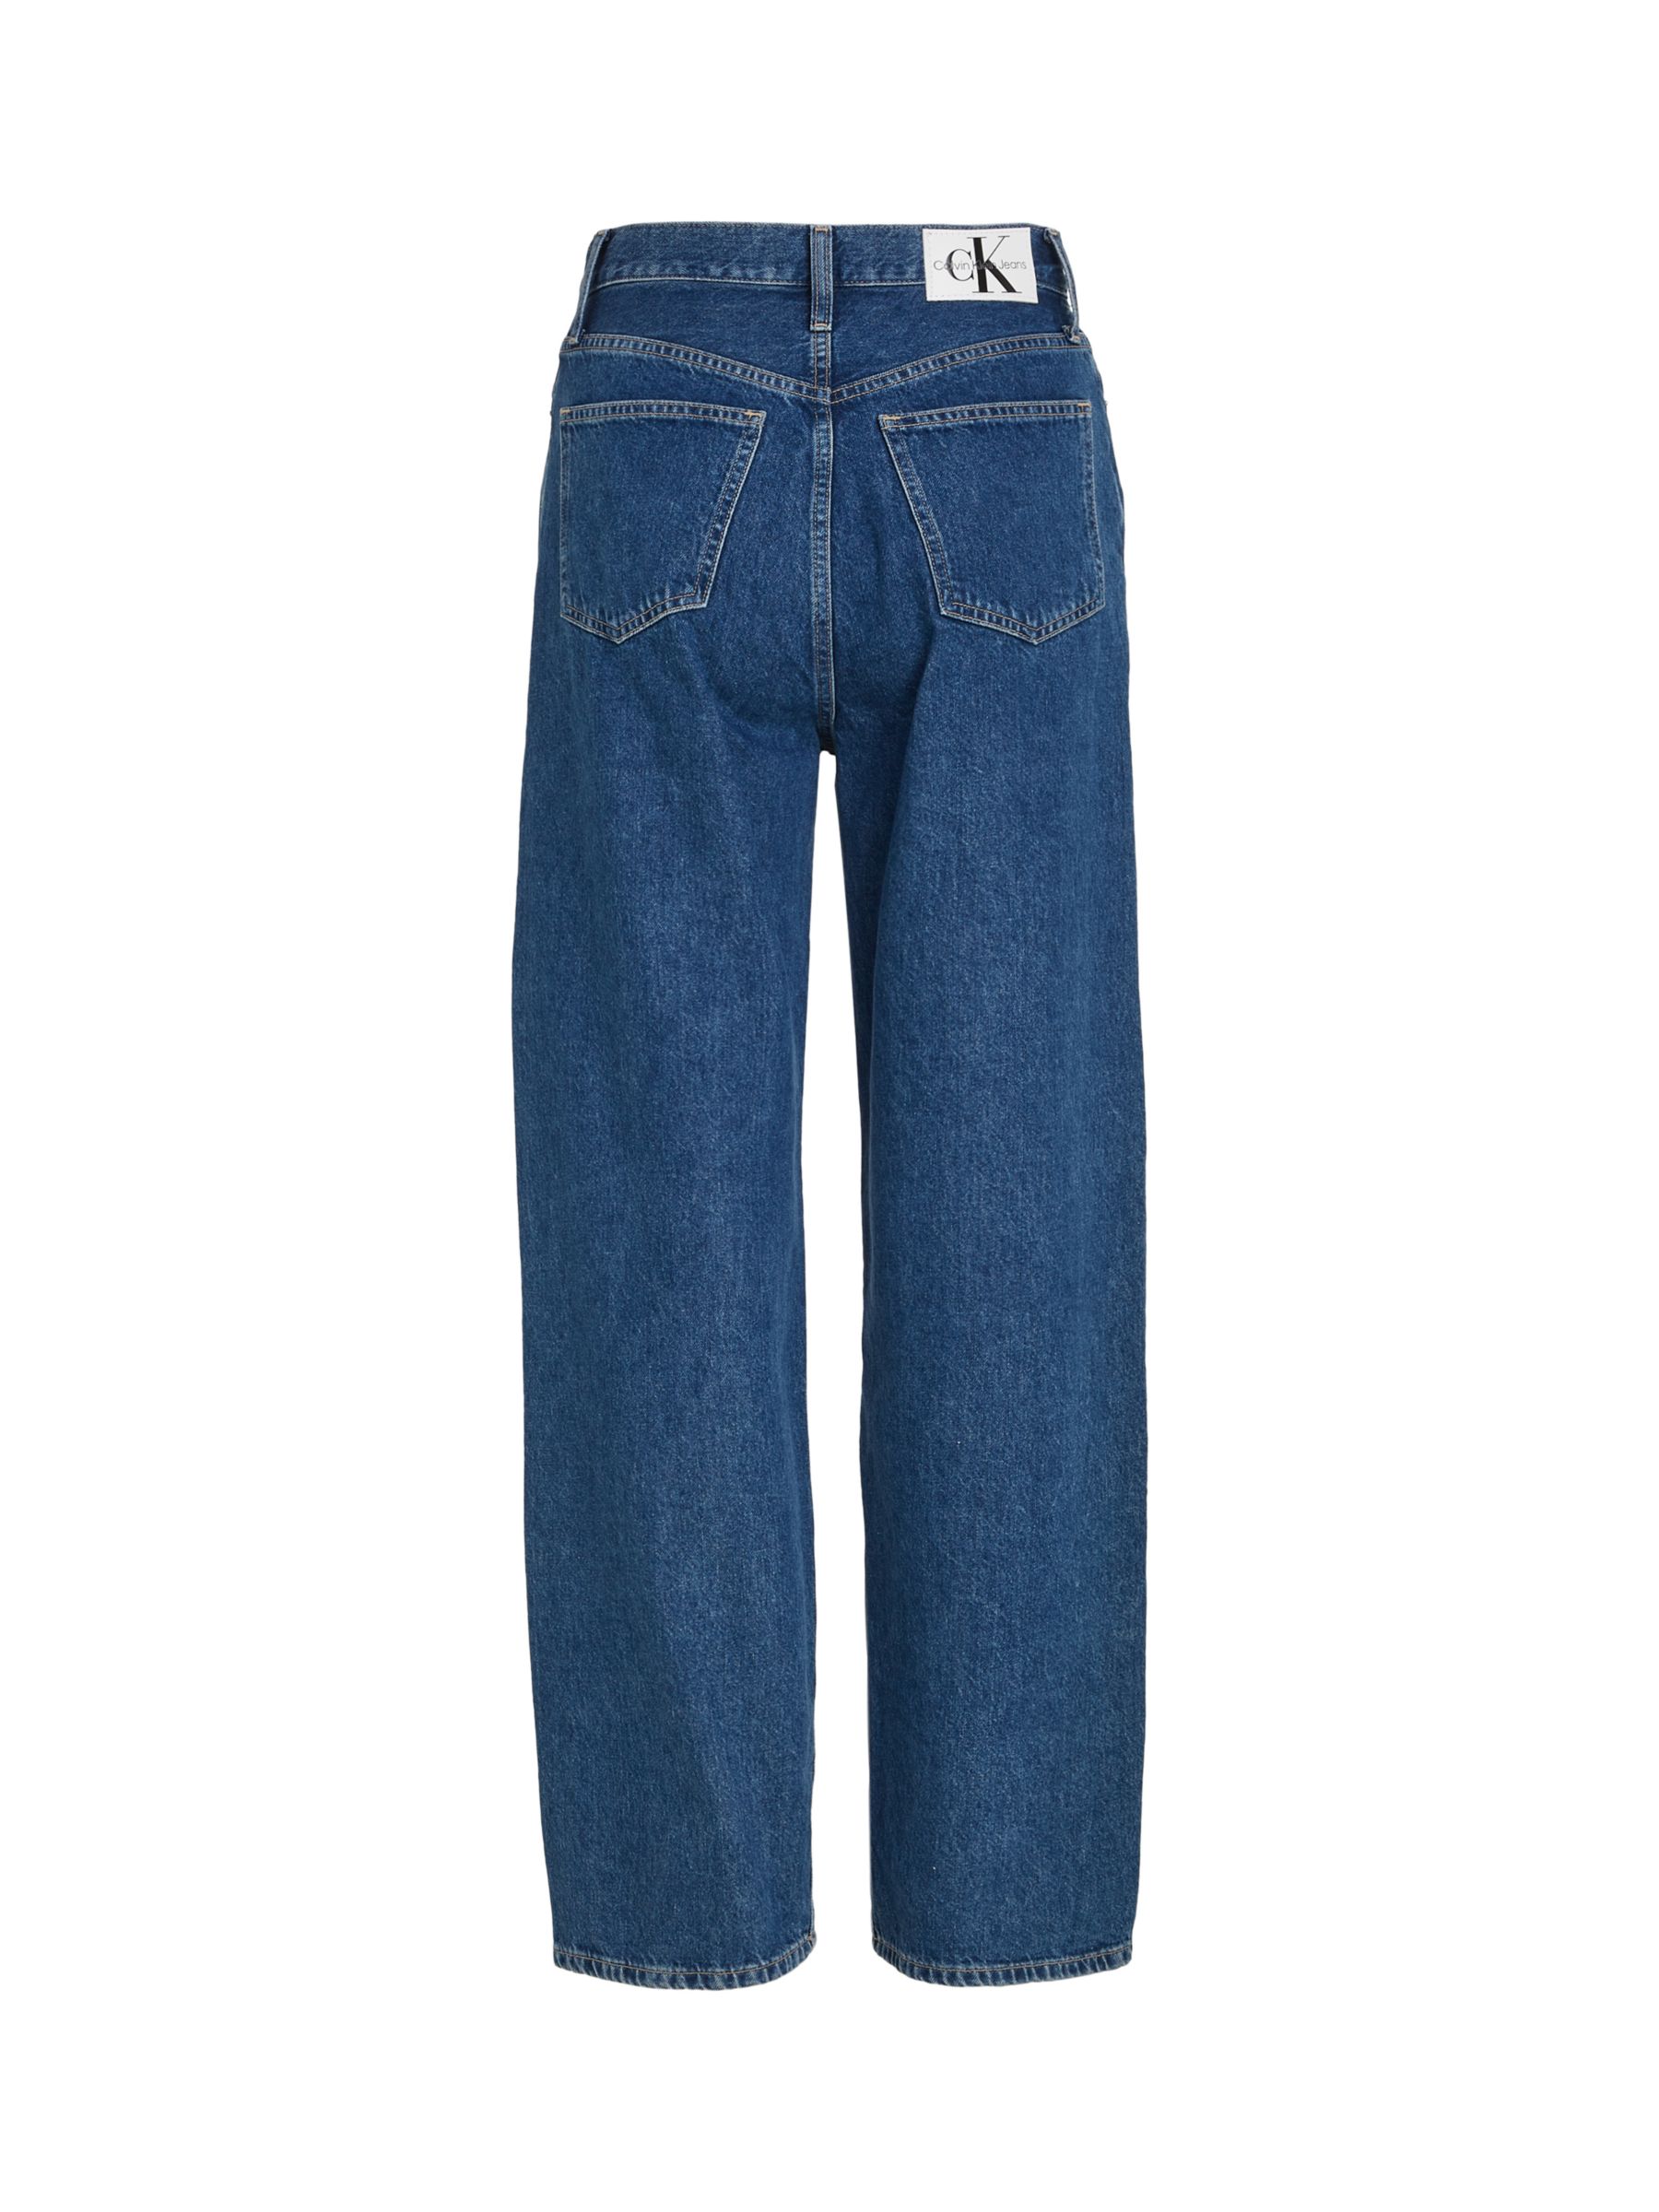 Calvin Klein High Rise Relaxed Fit Jeans, Mid Blue, W25/L32